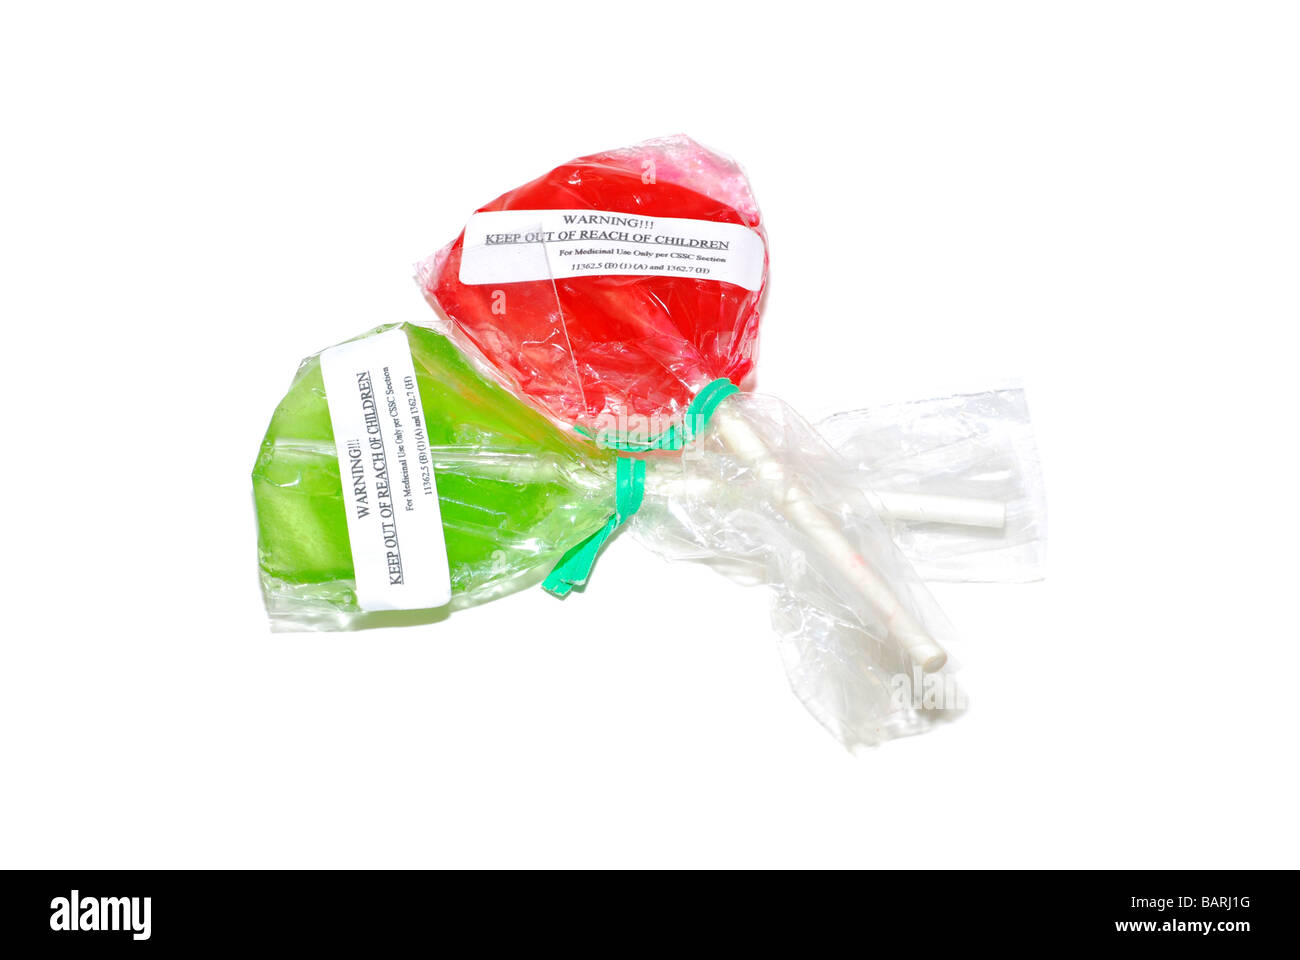 Two flavored lollipops containing edible medical cannabis Stock Photo